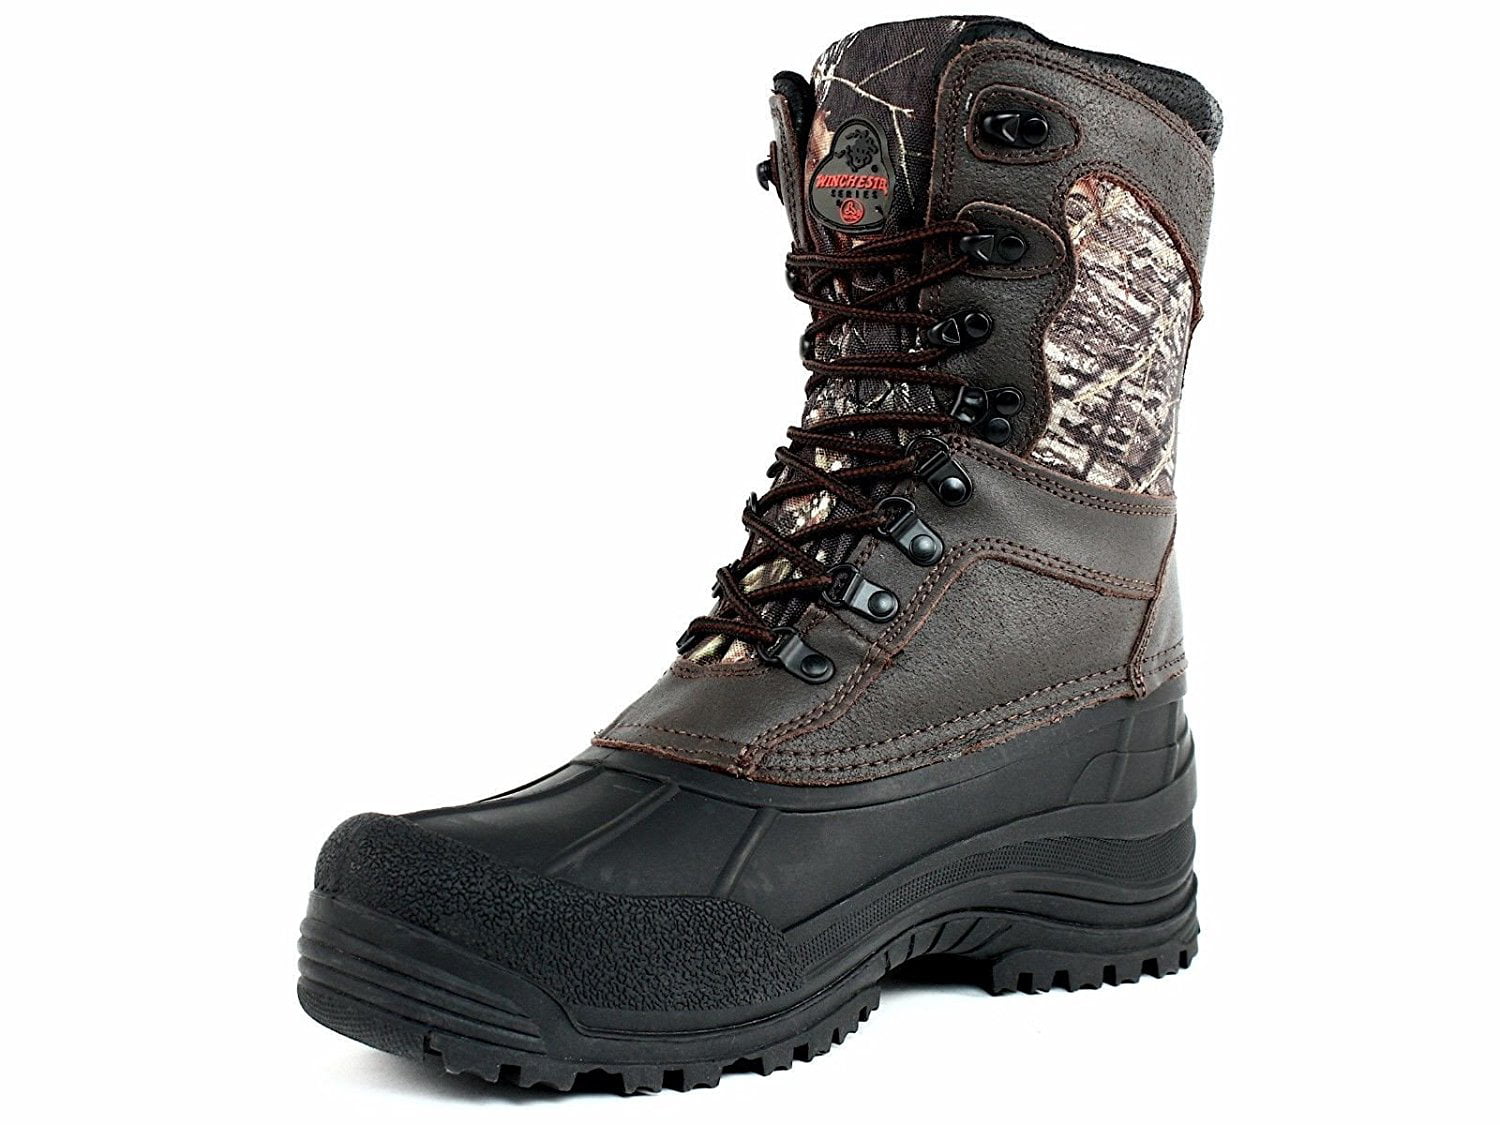 WINCHESTER BIG MIKE 9" HUNTING BOOTS MEN'S SIZE 10 